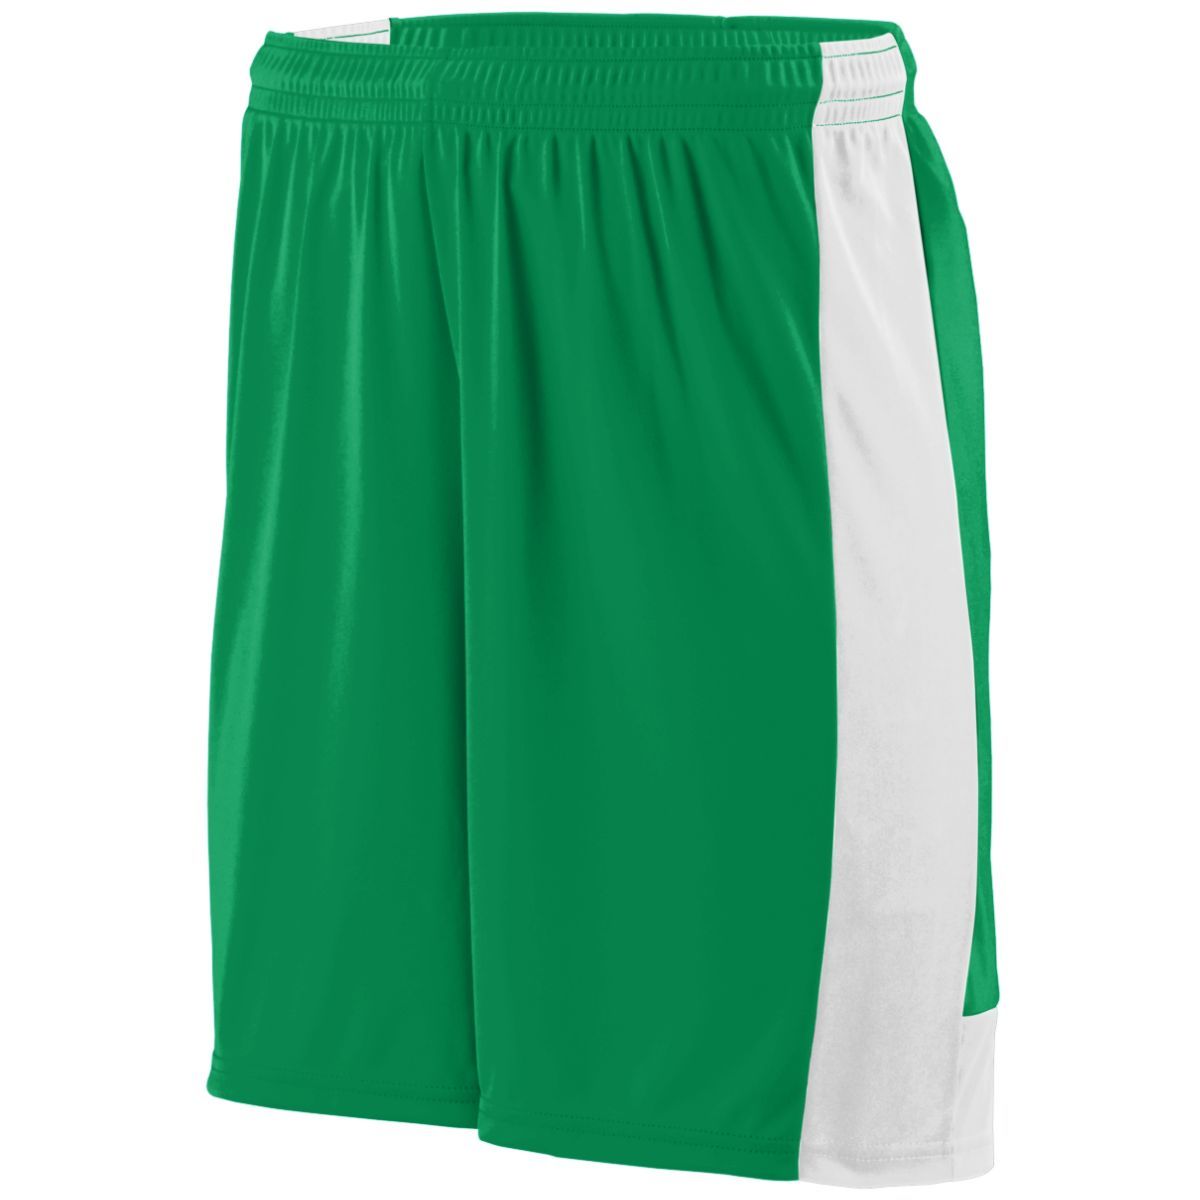 Augusta Sportswear Youth Lightning Shorts in Kelly/White  -Part of the Youth, Youth-Shorts, Augusta-Products, Soccer, All-Sports-1 product lines at KanaleyCreations.com